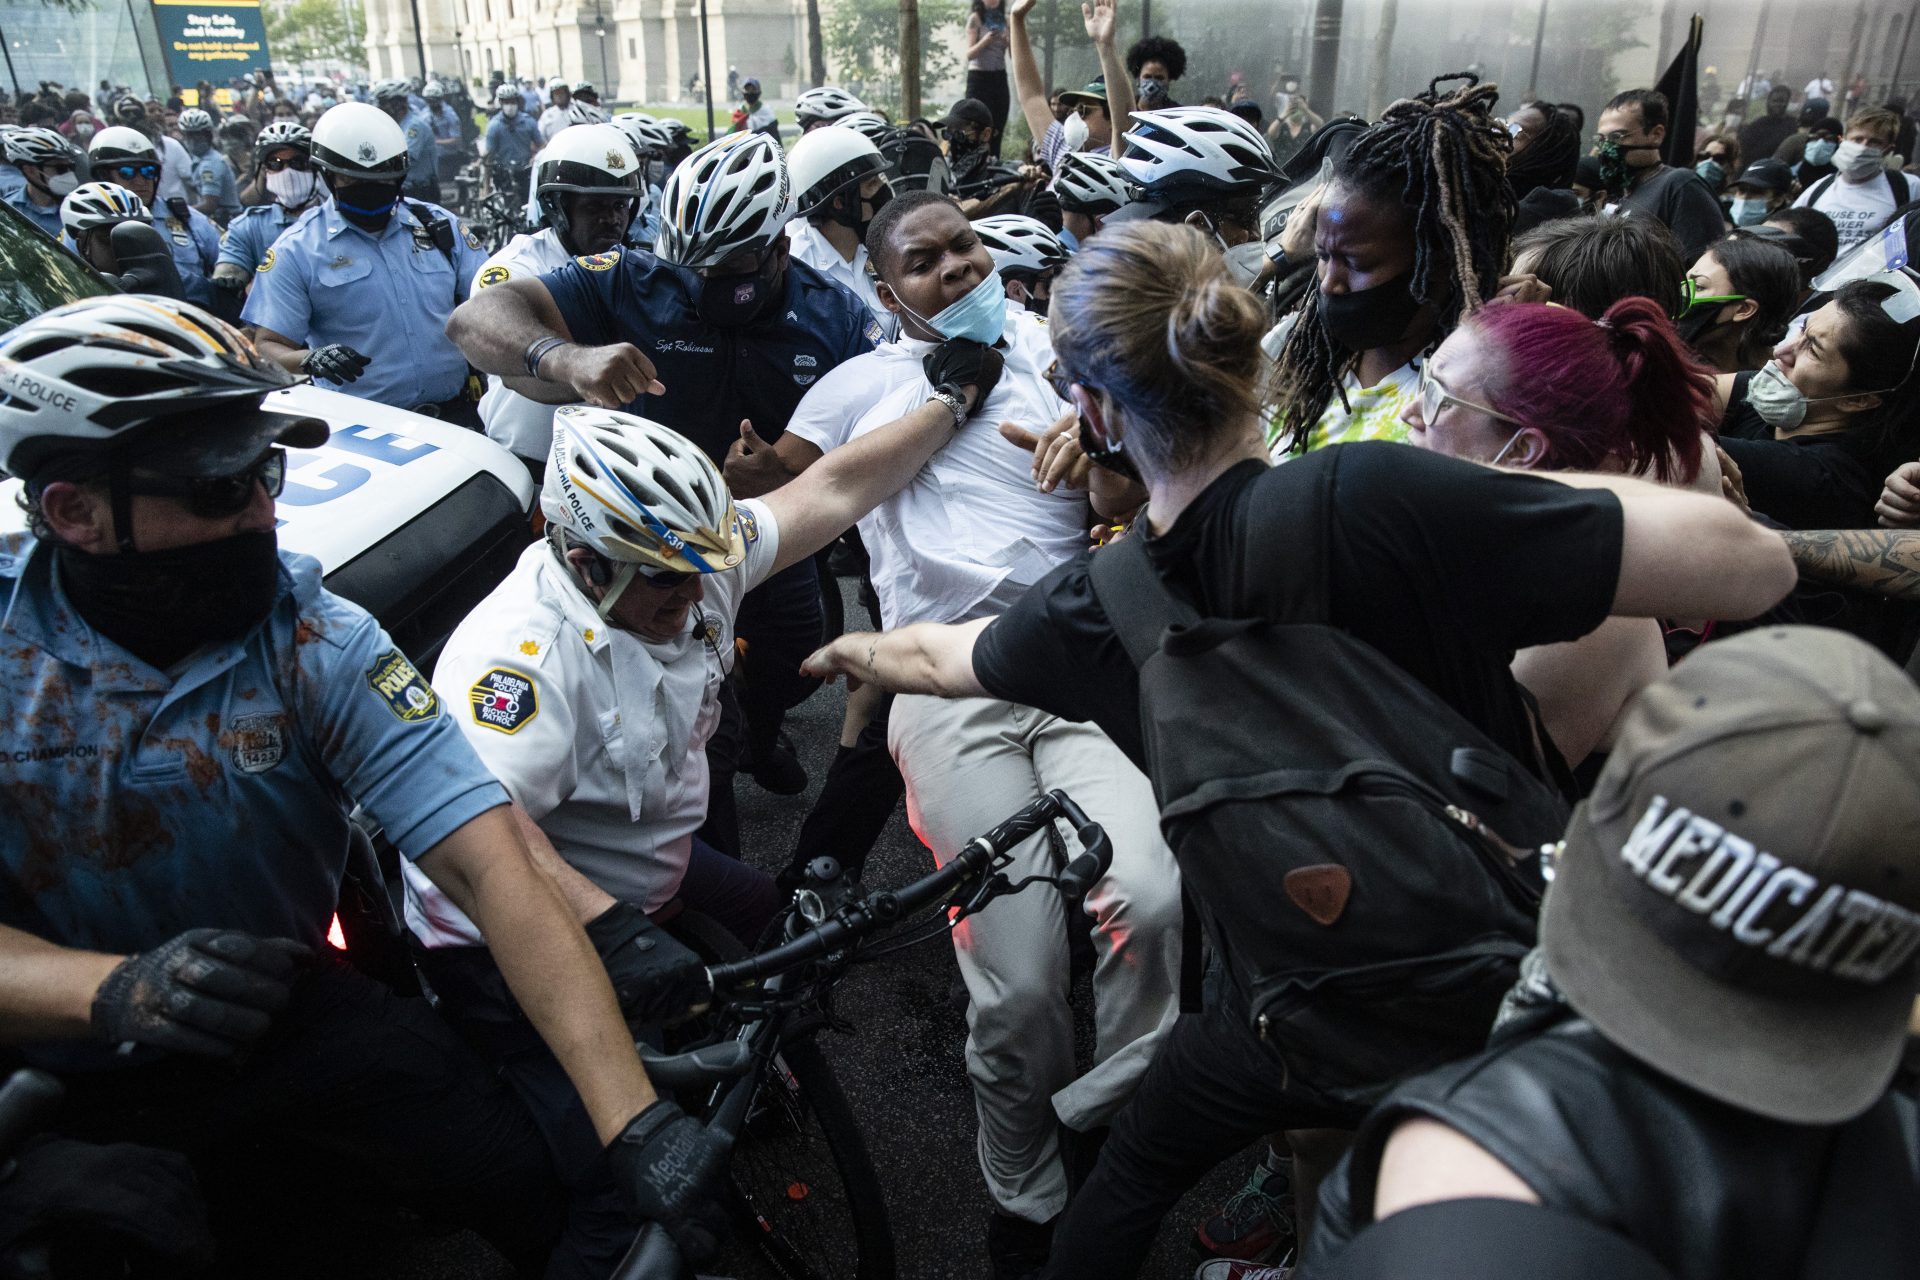 Police and protesters clash Saturday, May 30, 2020, in Philadelphia, during a demonstration over the death of George Floyd. Protests were held throughout the country over the death of Floyd, a black man who died after being restrained by Minneapolis police officers on May 25.